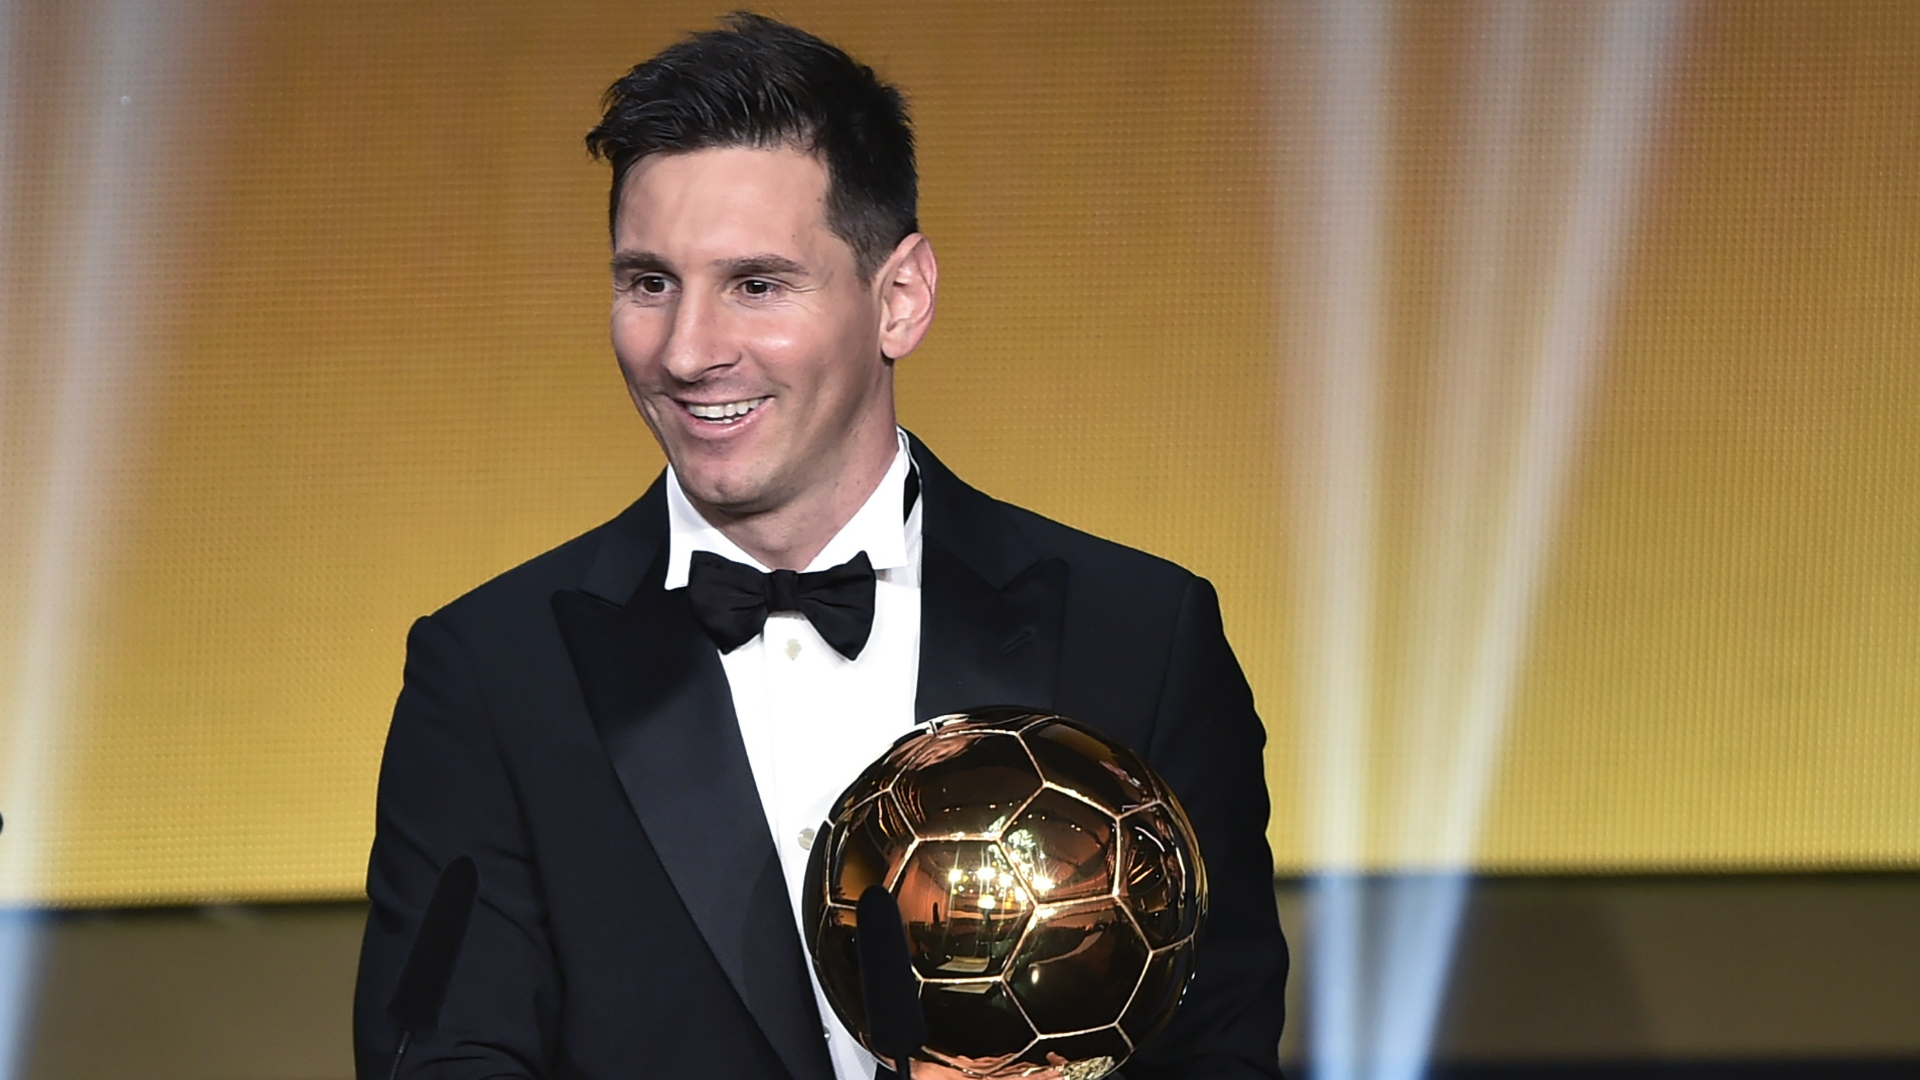 Fifa Ballon d'Or is just a popularity contest for strikers?